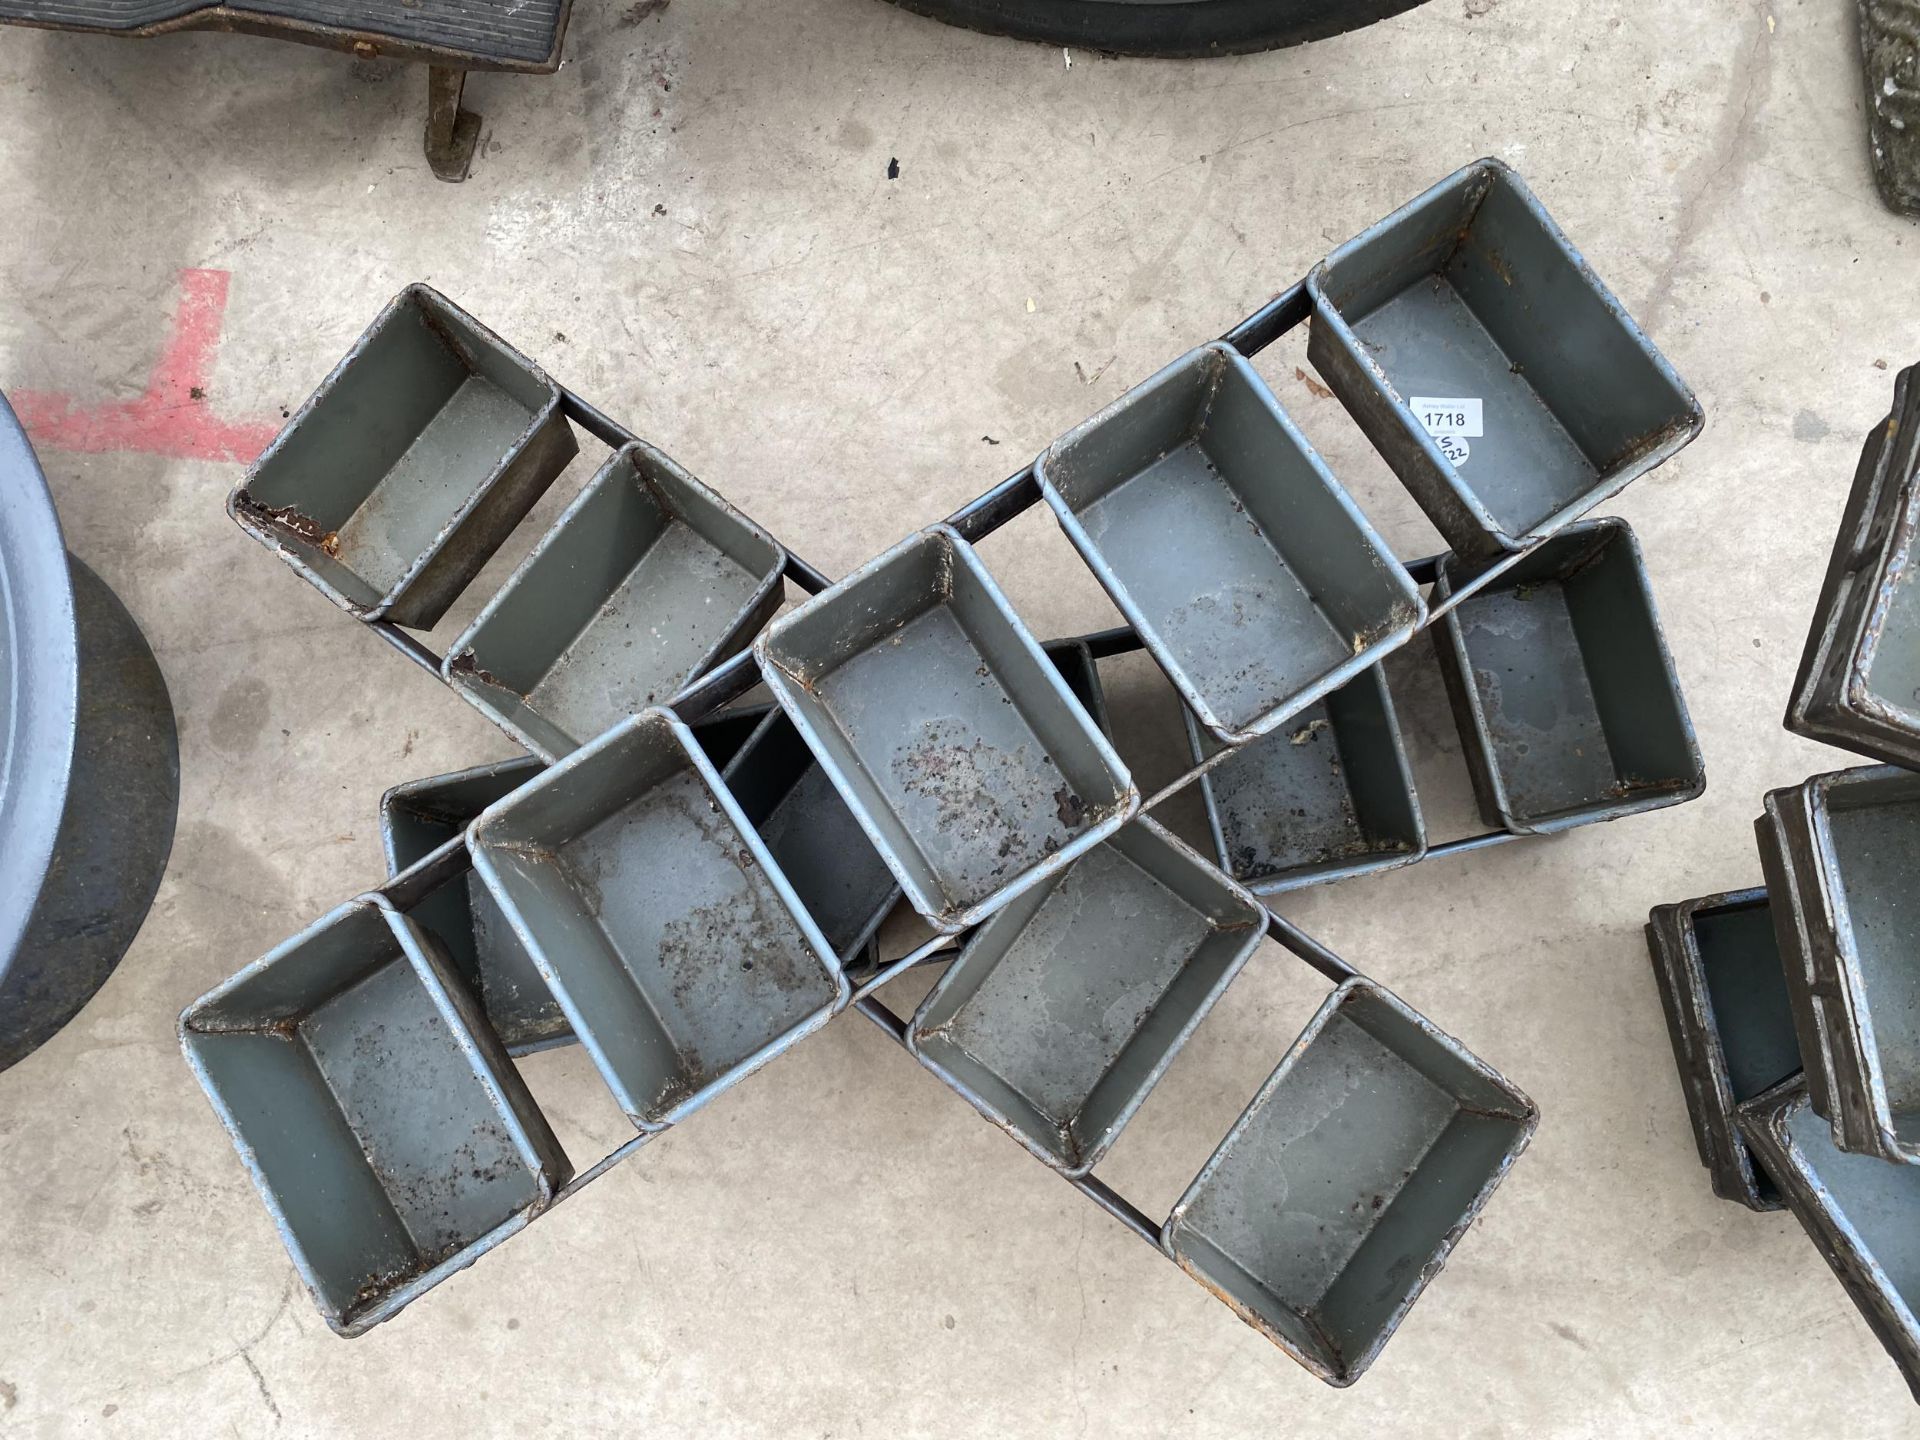 THREE VINTAGE METAL FIVE SECTION TRAY PLANTERS